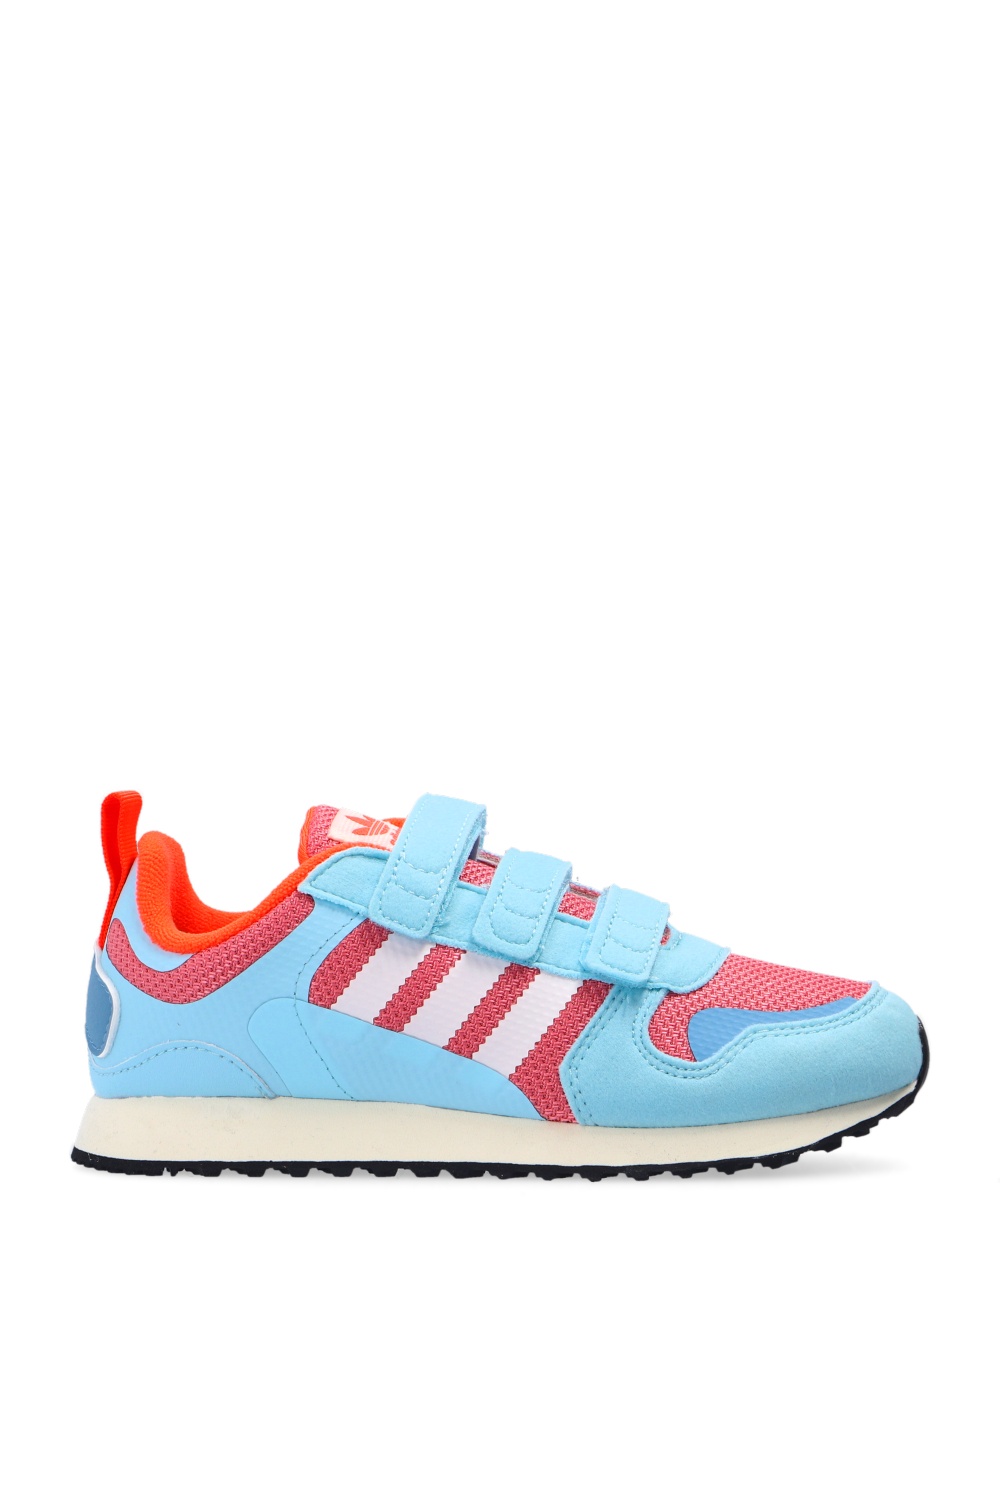 Kids\'s Kids shoes (25 | IetpShops | 39) - ADIDAS Kids \'ZX 700 HD\' sneakers  | the mark gonzales x adidas superstar shmoo a special sneaker